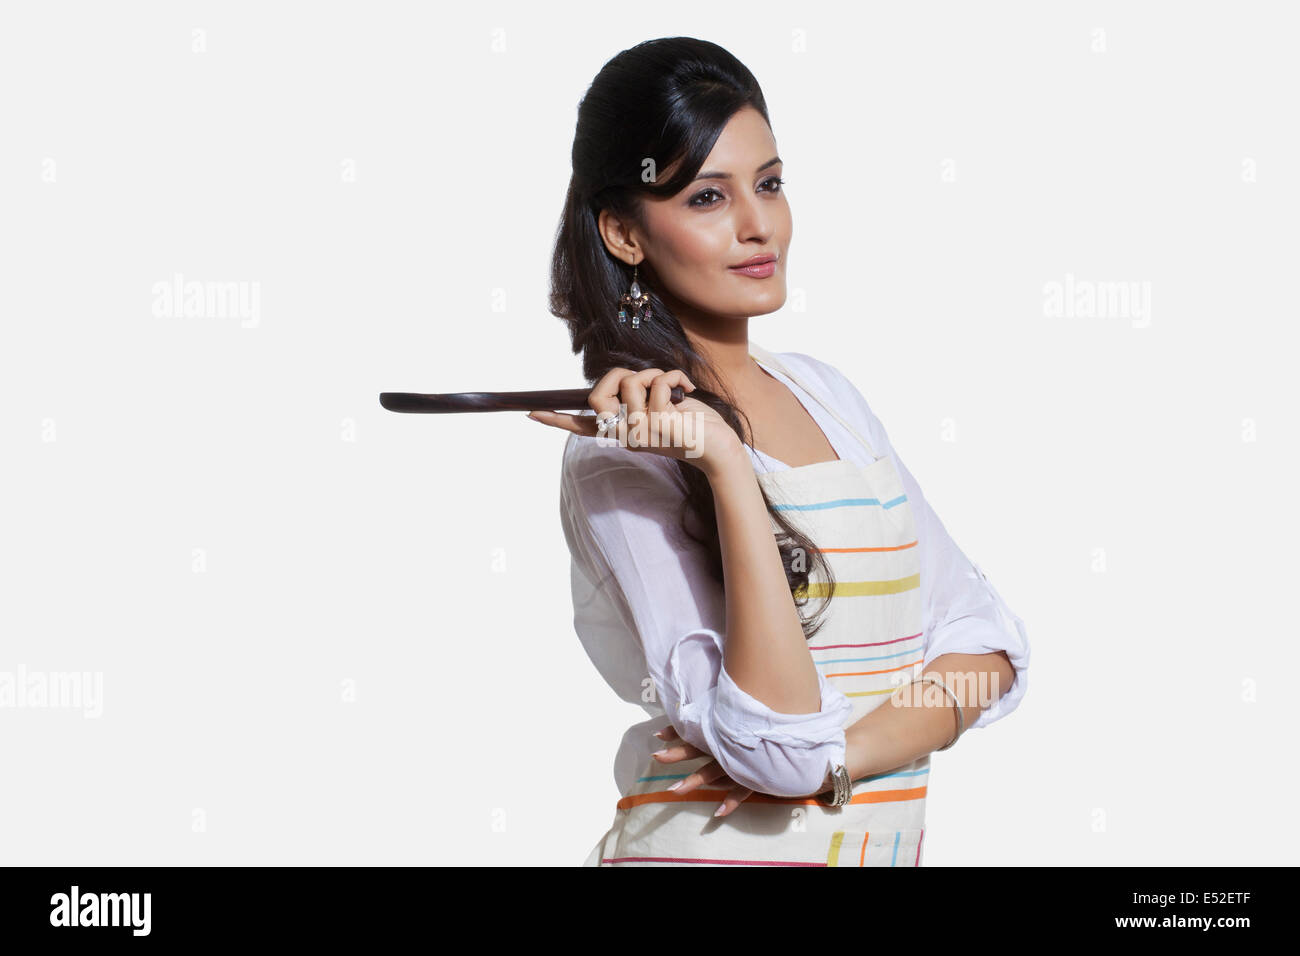 Woman with a cooking utensil Stock Photo